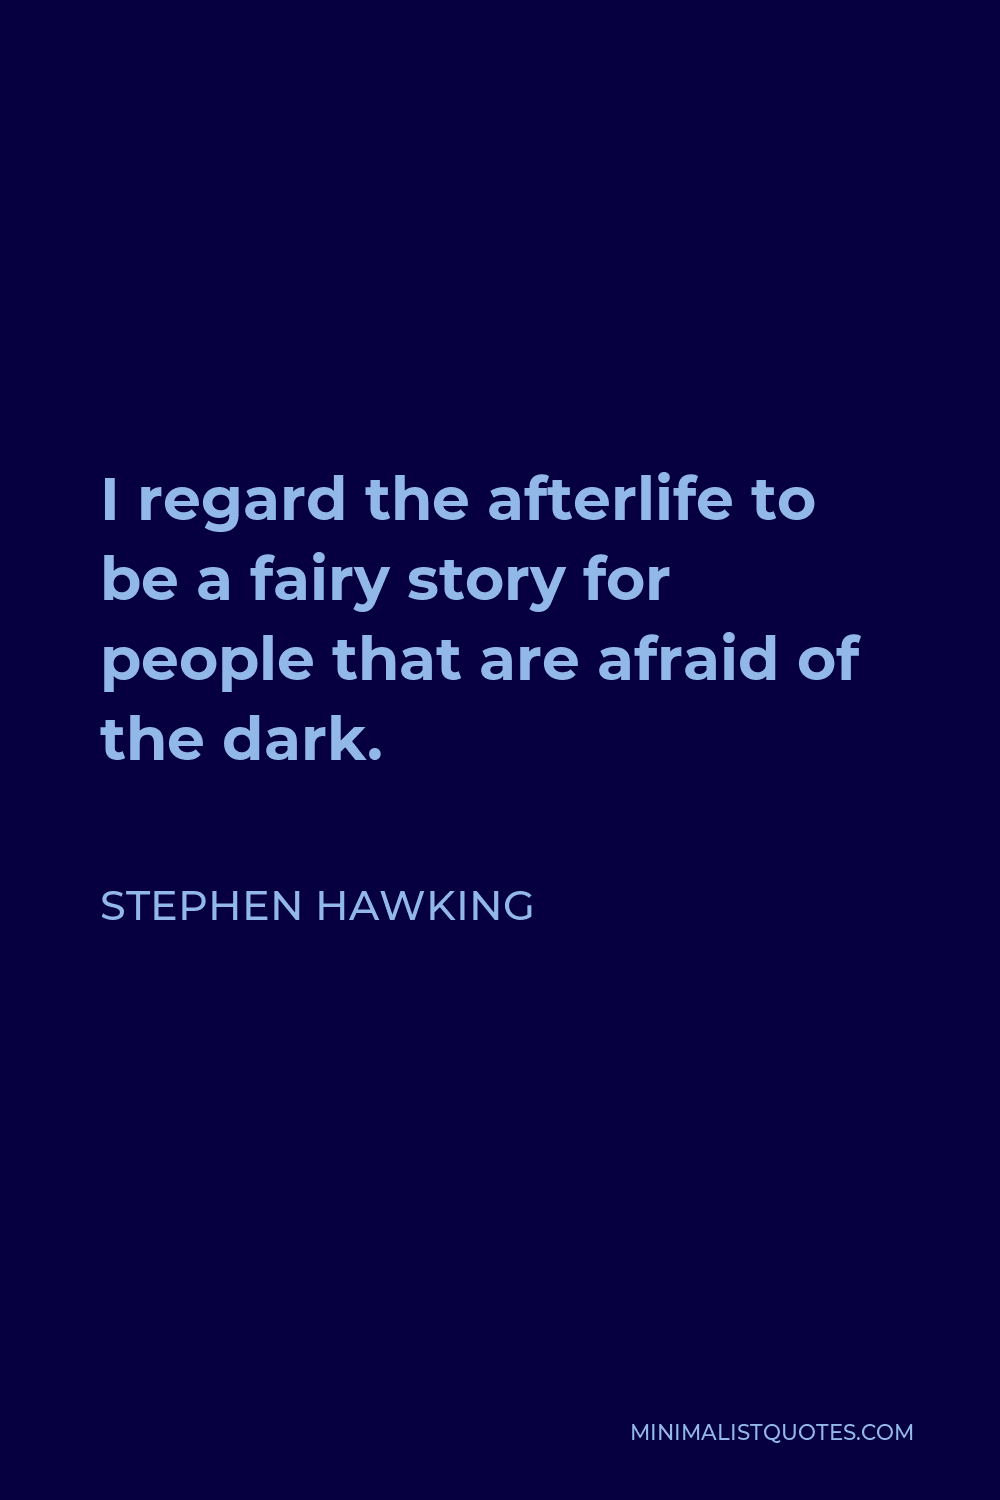 Stephen Hawking Quote - I regard the afterlife to be a fairy story for people that are afraid of the dark.